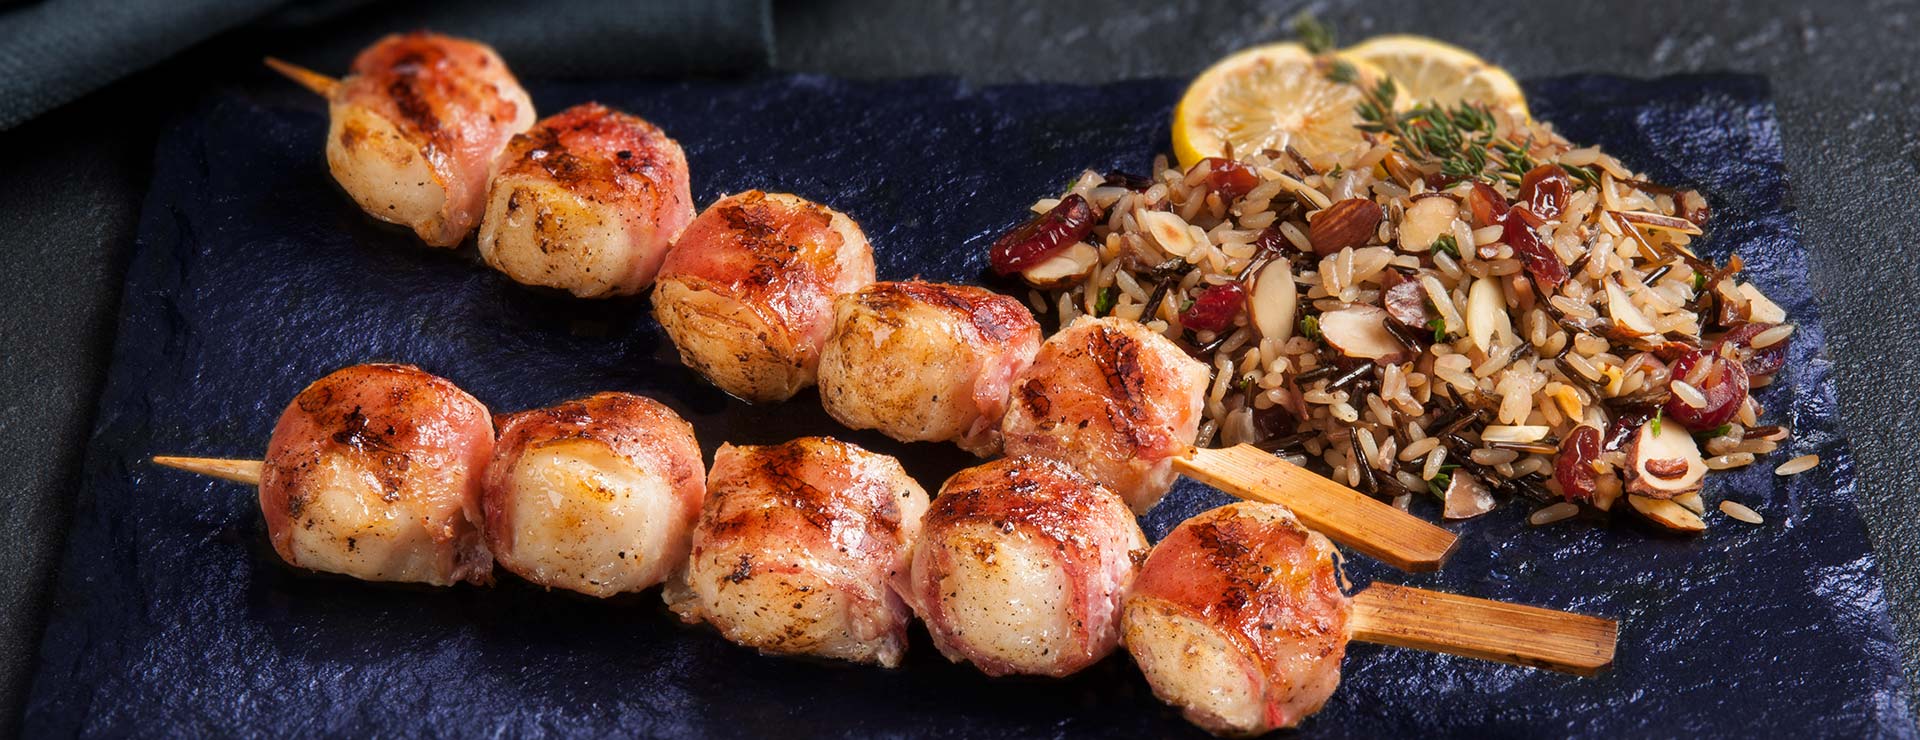 Bacon Wrapped Scallops Skewers served with Rice Pilaf